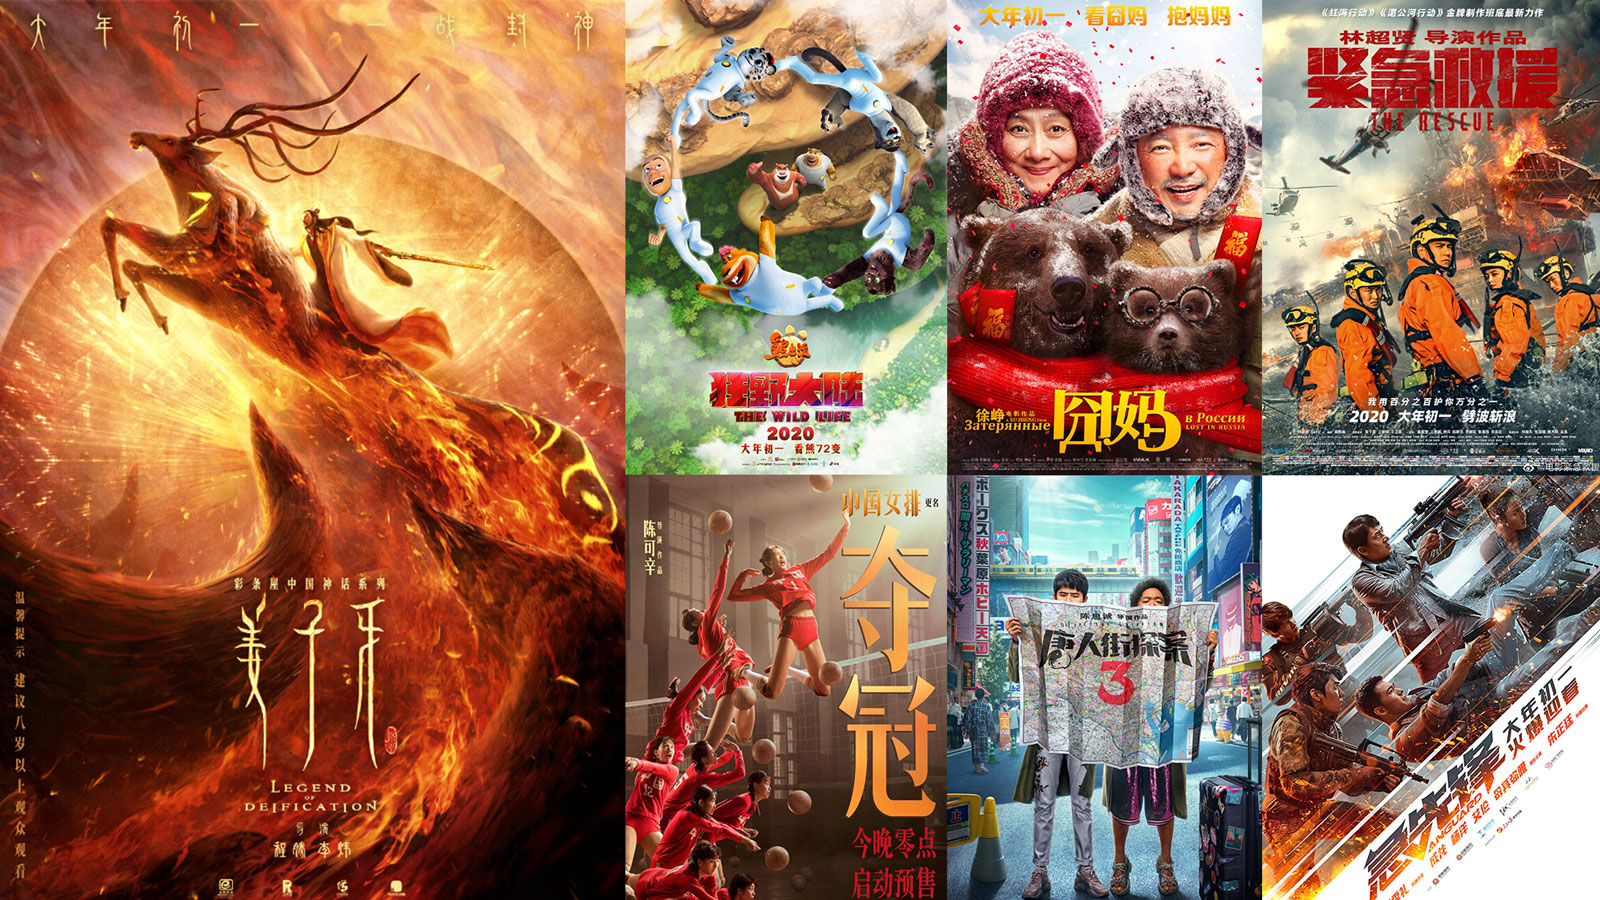 Spring Festival movie releases canceled due to coronavirus outbreak